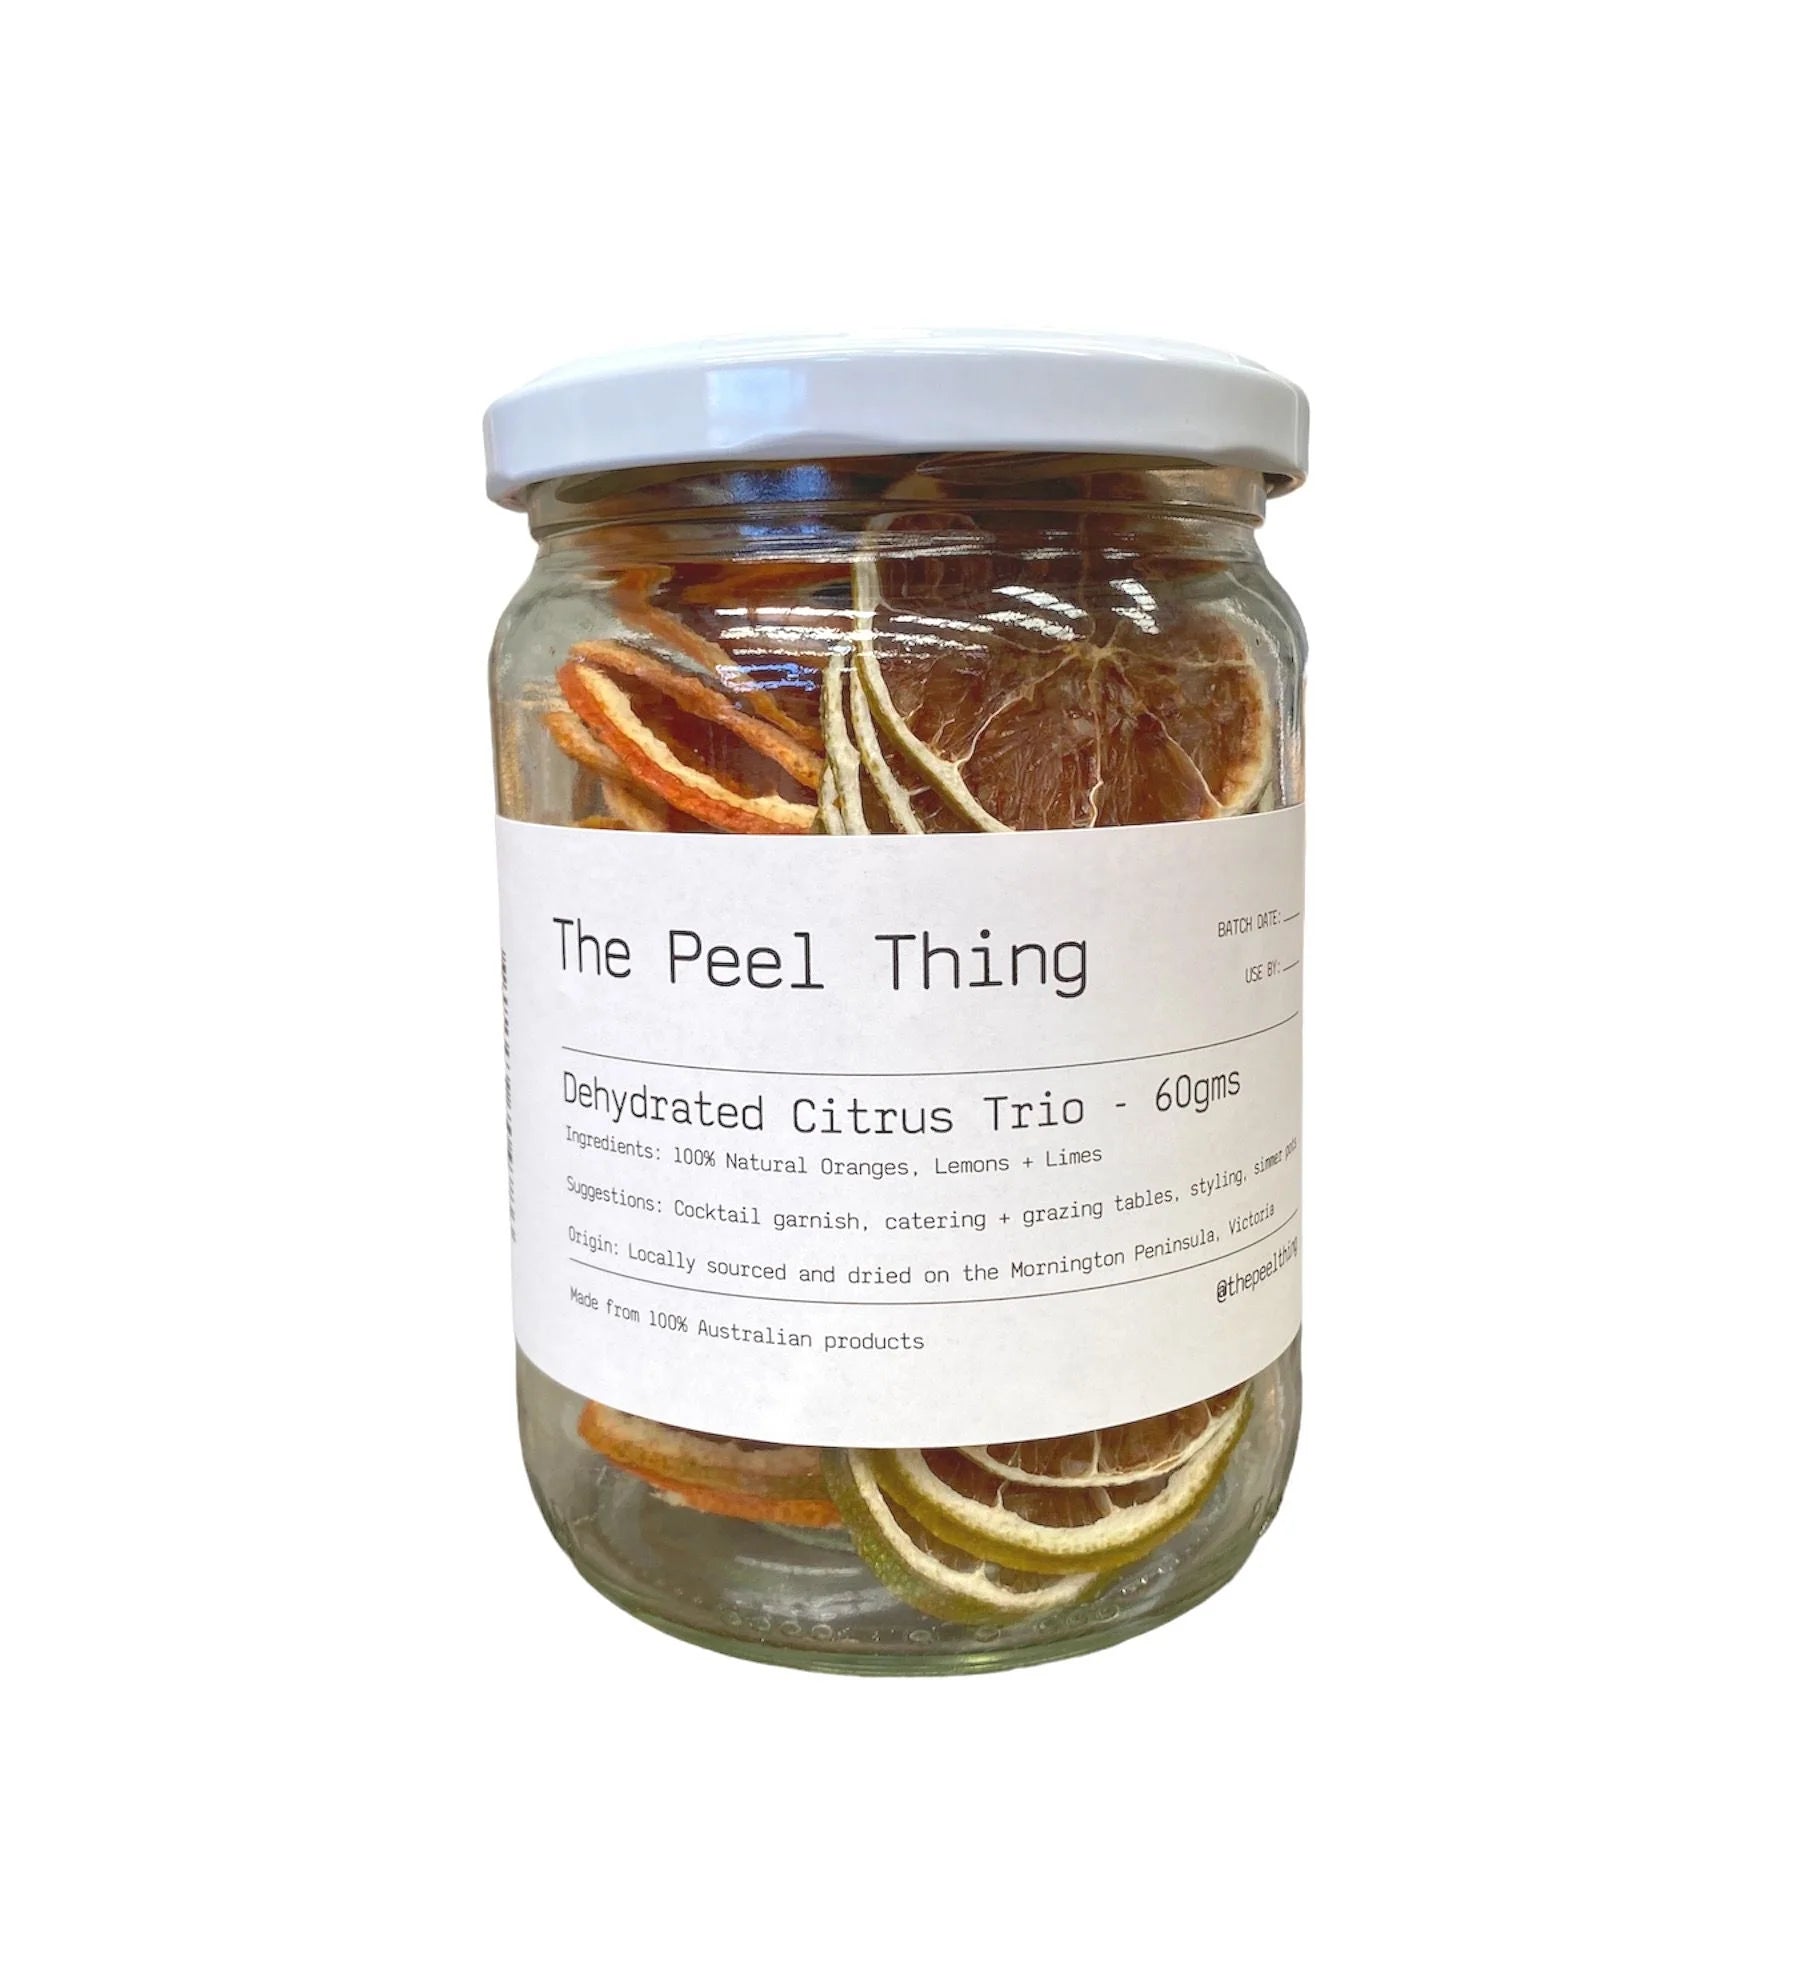 Mill & Hide - The Peel Thing - Dehydrated Citrus Trio